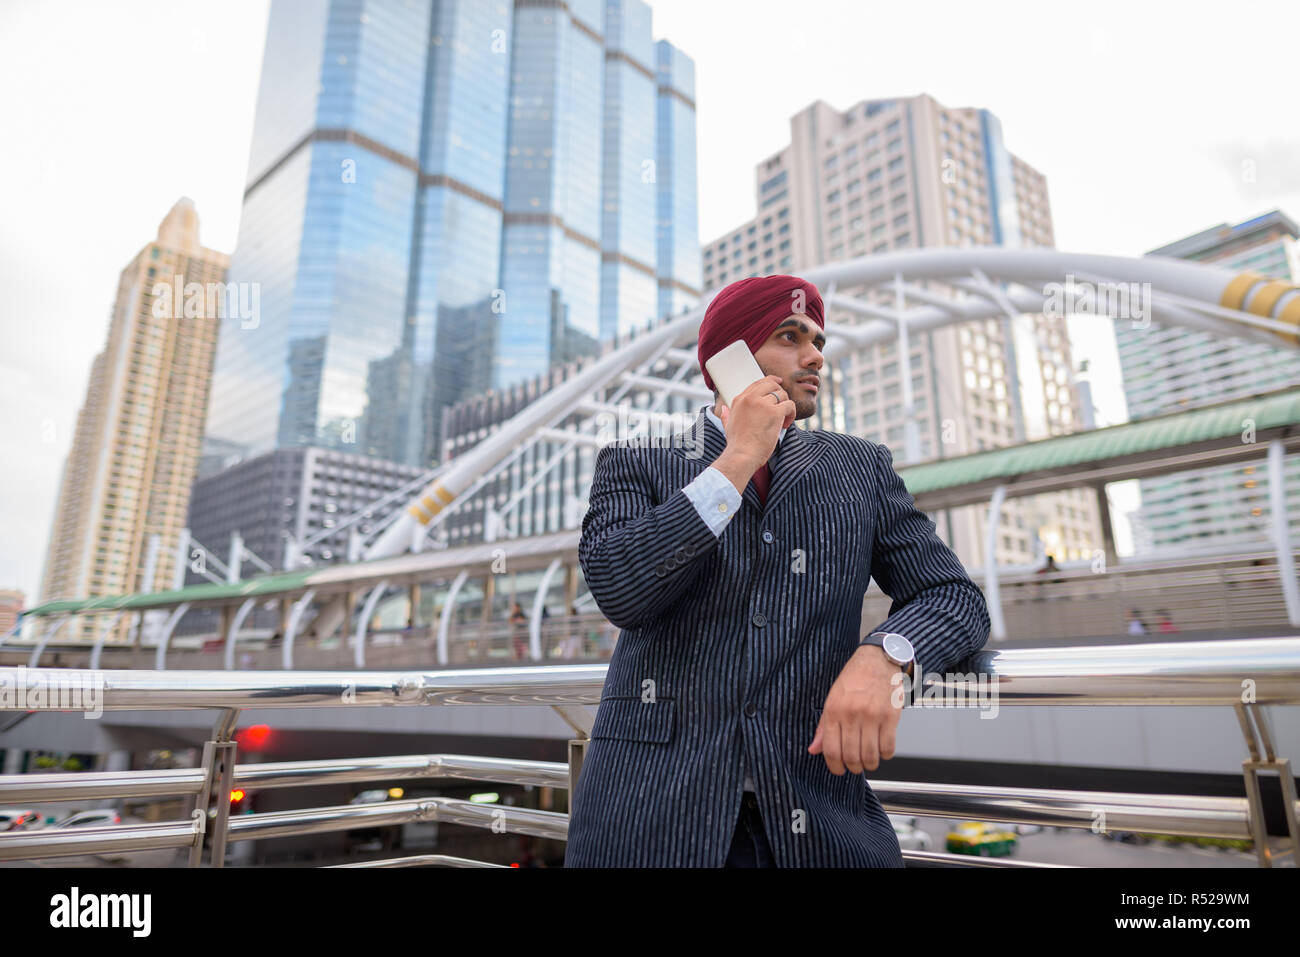 Indian businessman with turban outdoors in city using mobile phone Stock Photo